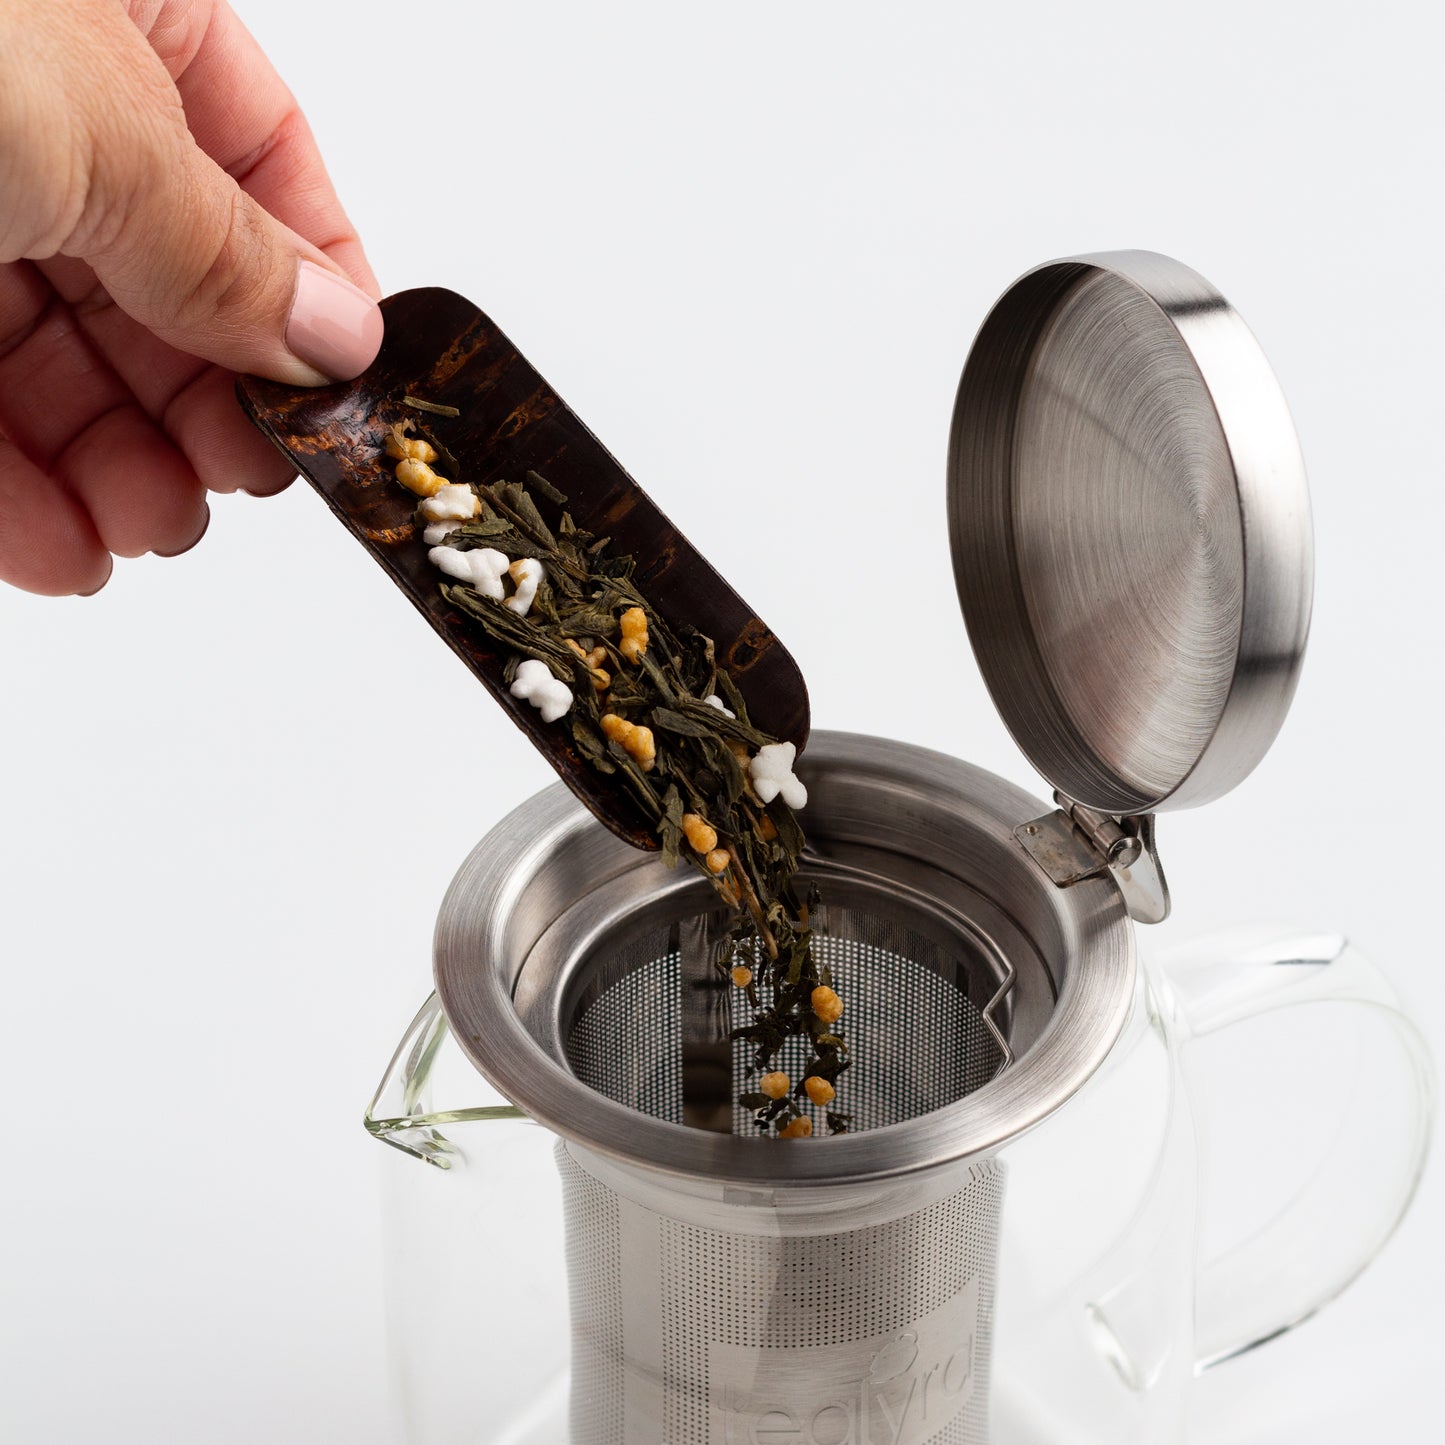 A hand shown pouring loose tea leaves from a cherry wood scoop into a stainless steel infuser in a glass teapot